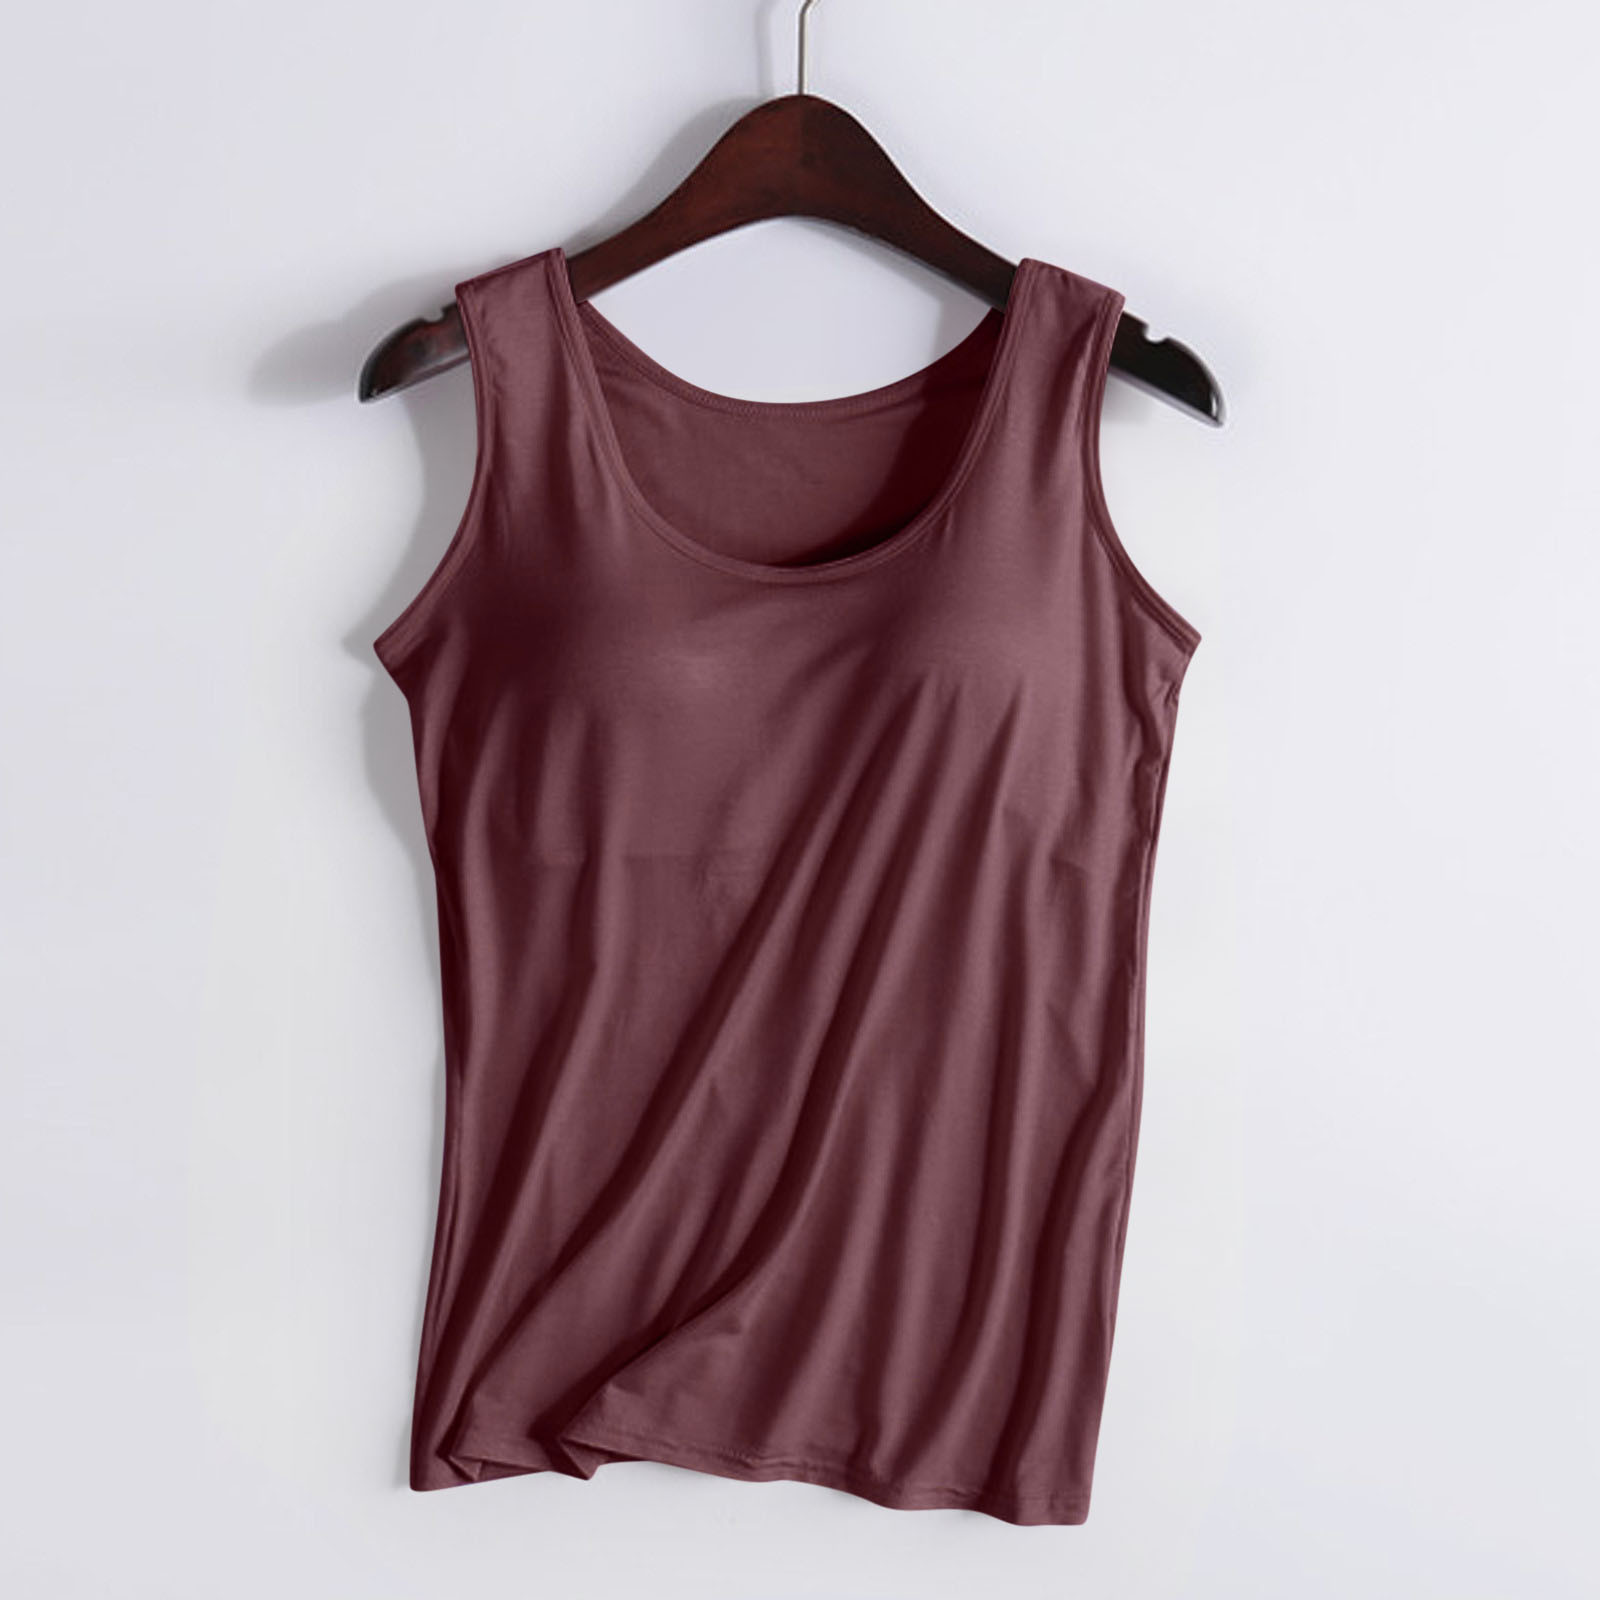 Tube Tops for Women with Built in Bra Women's Organic Cotton Camisole ...